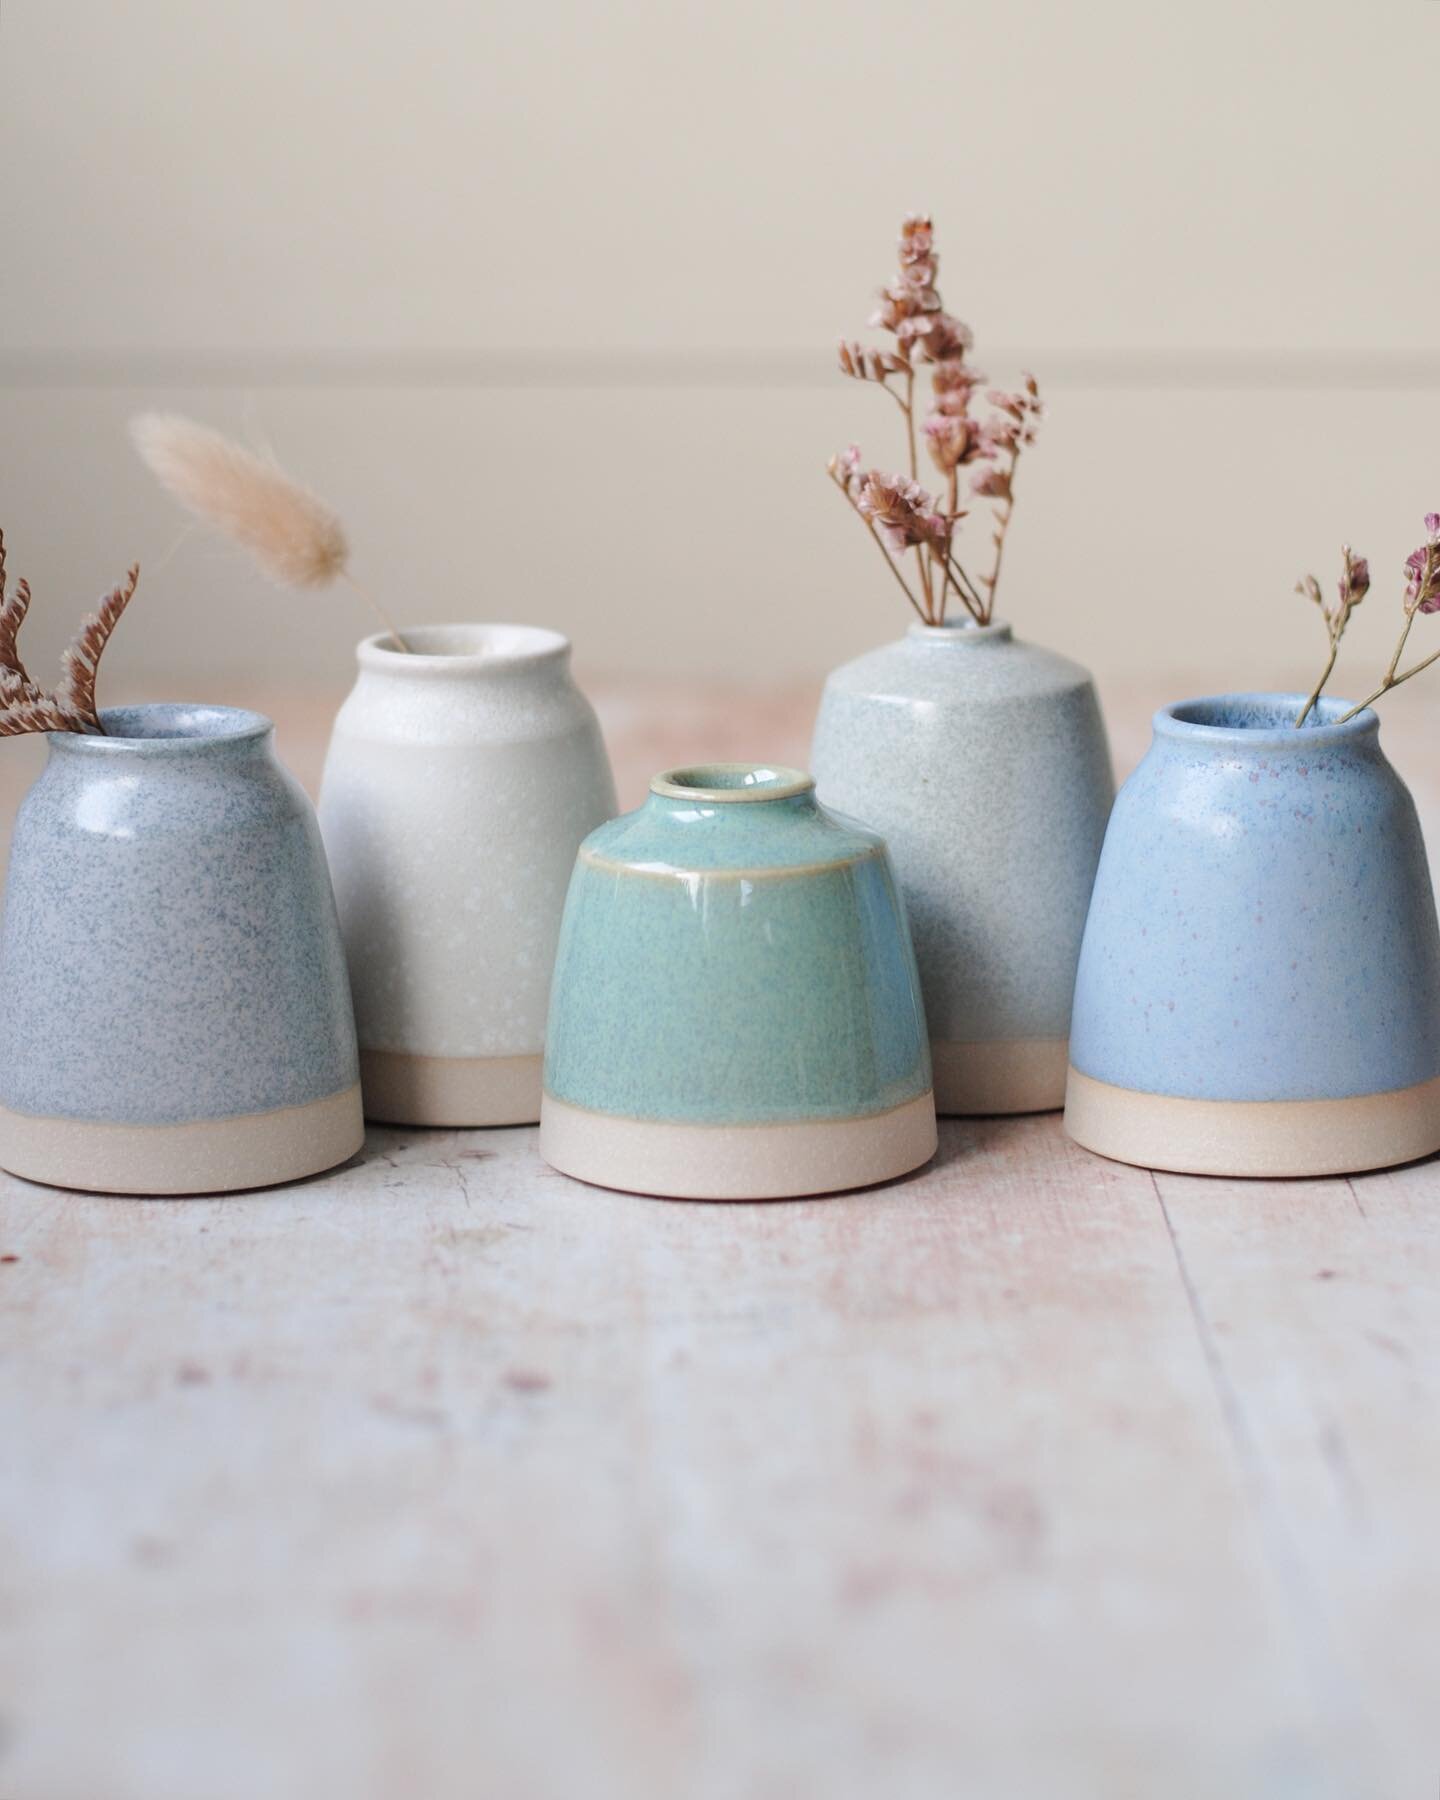 Pretty &lsquo;midi&rsquo; mini vases out of the kiln recently 😍

These vases are a little larger than my miniatures - but they&rsquo;re still pretty small! Ranging from 5cm upwards, they&rsquo;re perfect for a dried sprig 💐

I&rsquo;ve been listeni